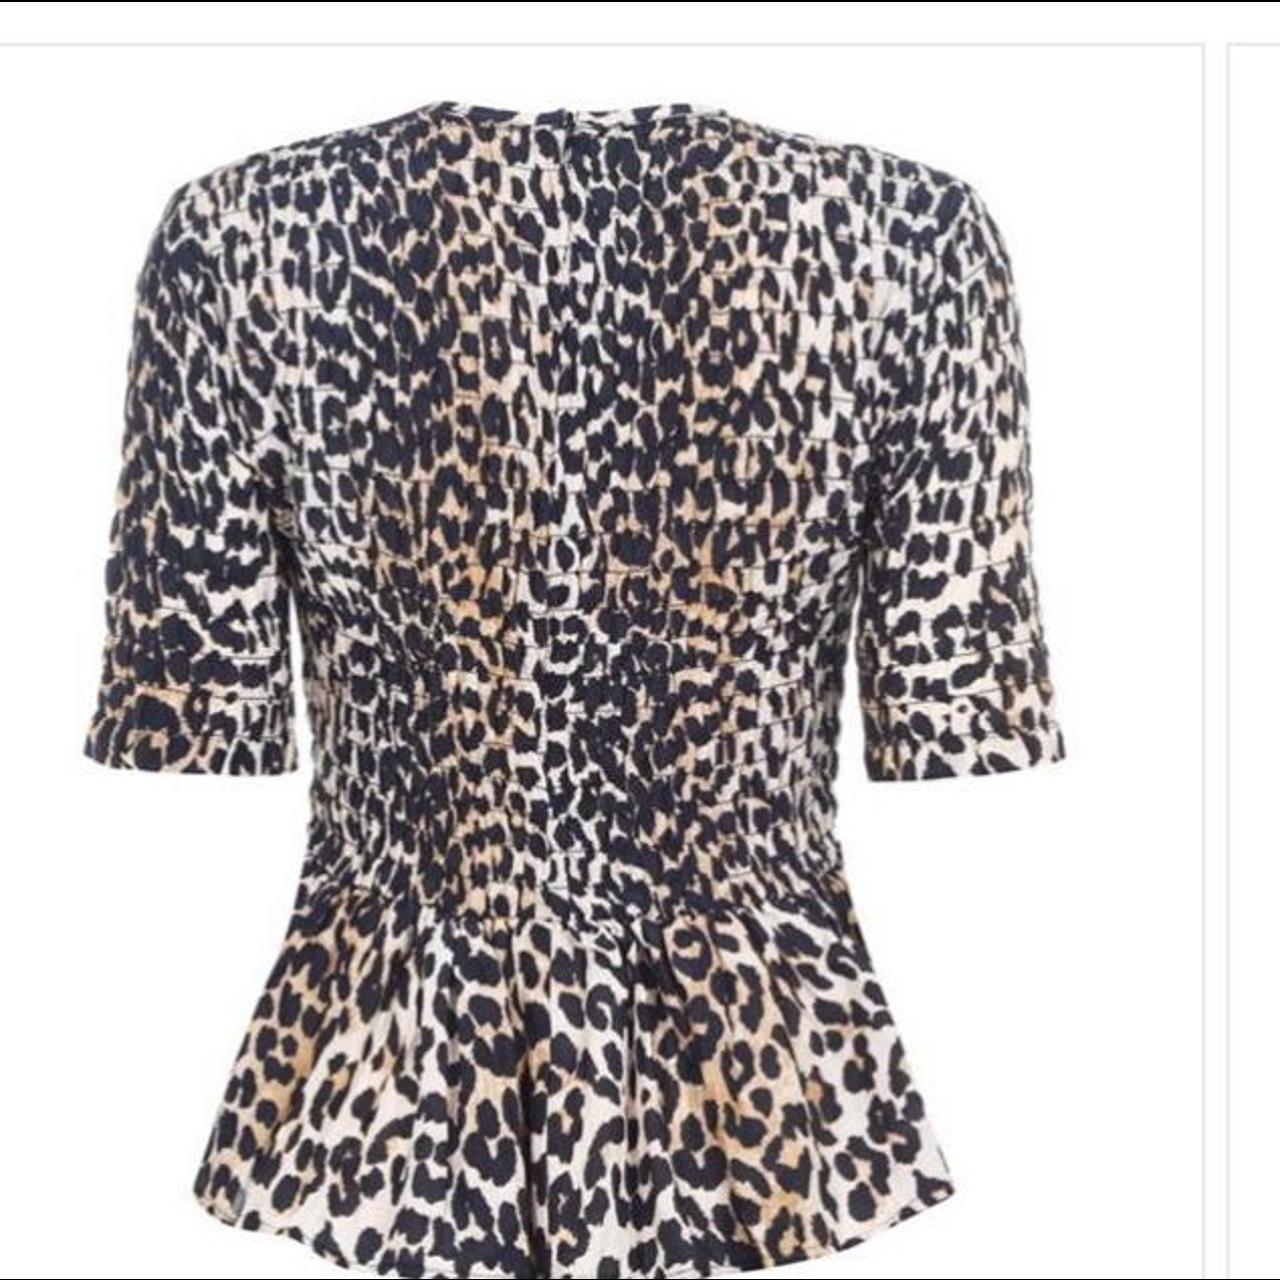 Product Image 2 - Ganni leopard top
Size 38/10
Perfect condition
Shirred